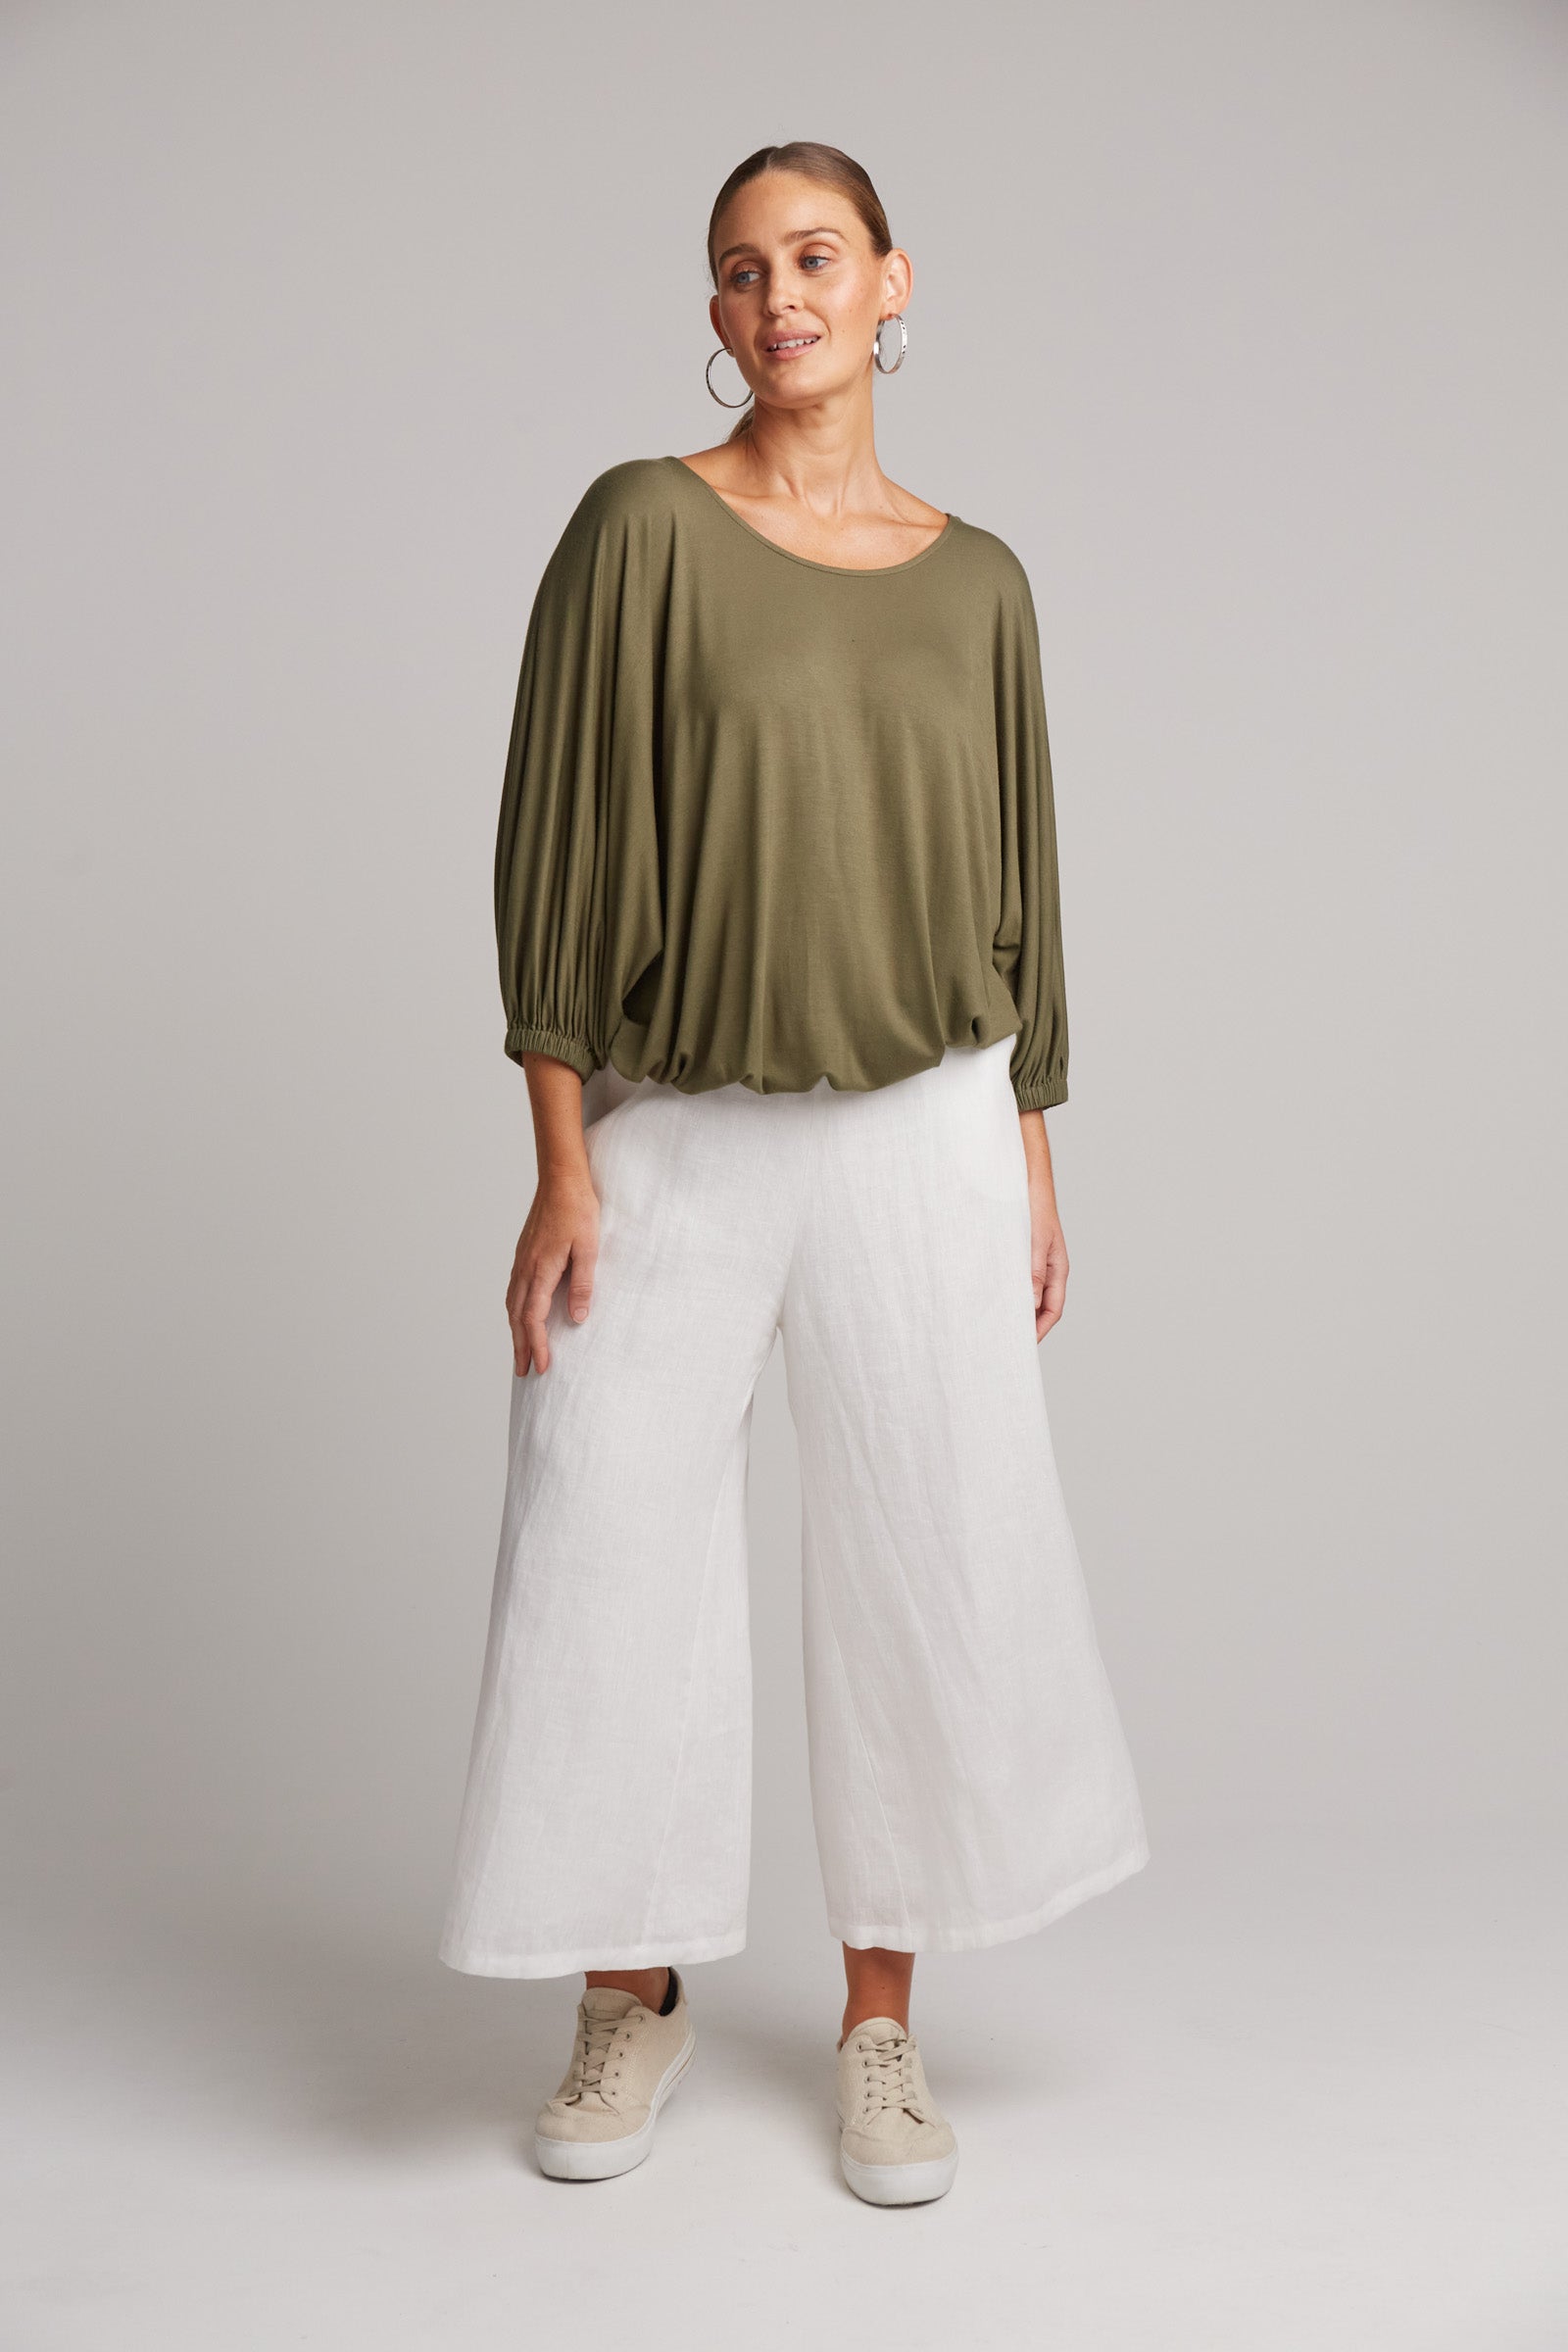 Studio Jersey Relaxed Top - Fern - eb&ive Clothing - Top 3/4 Sleeve Jersey